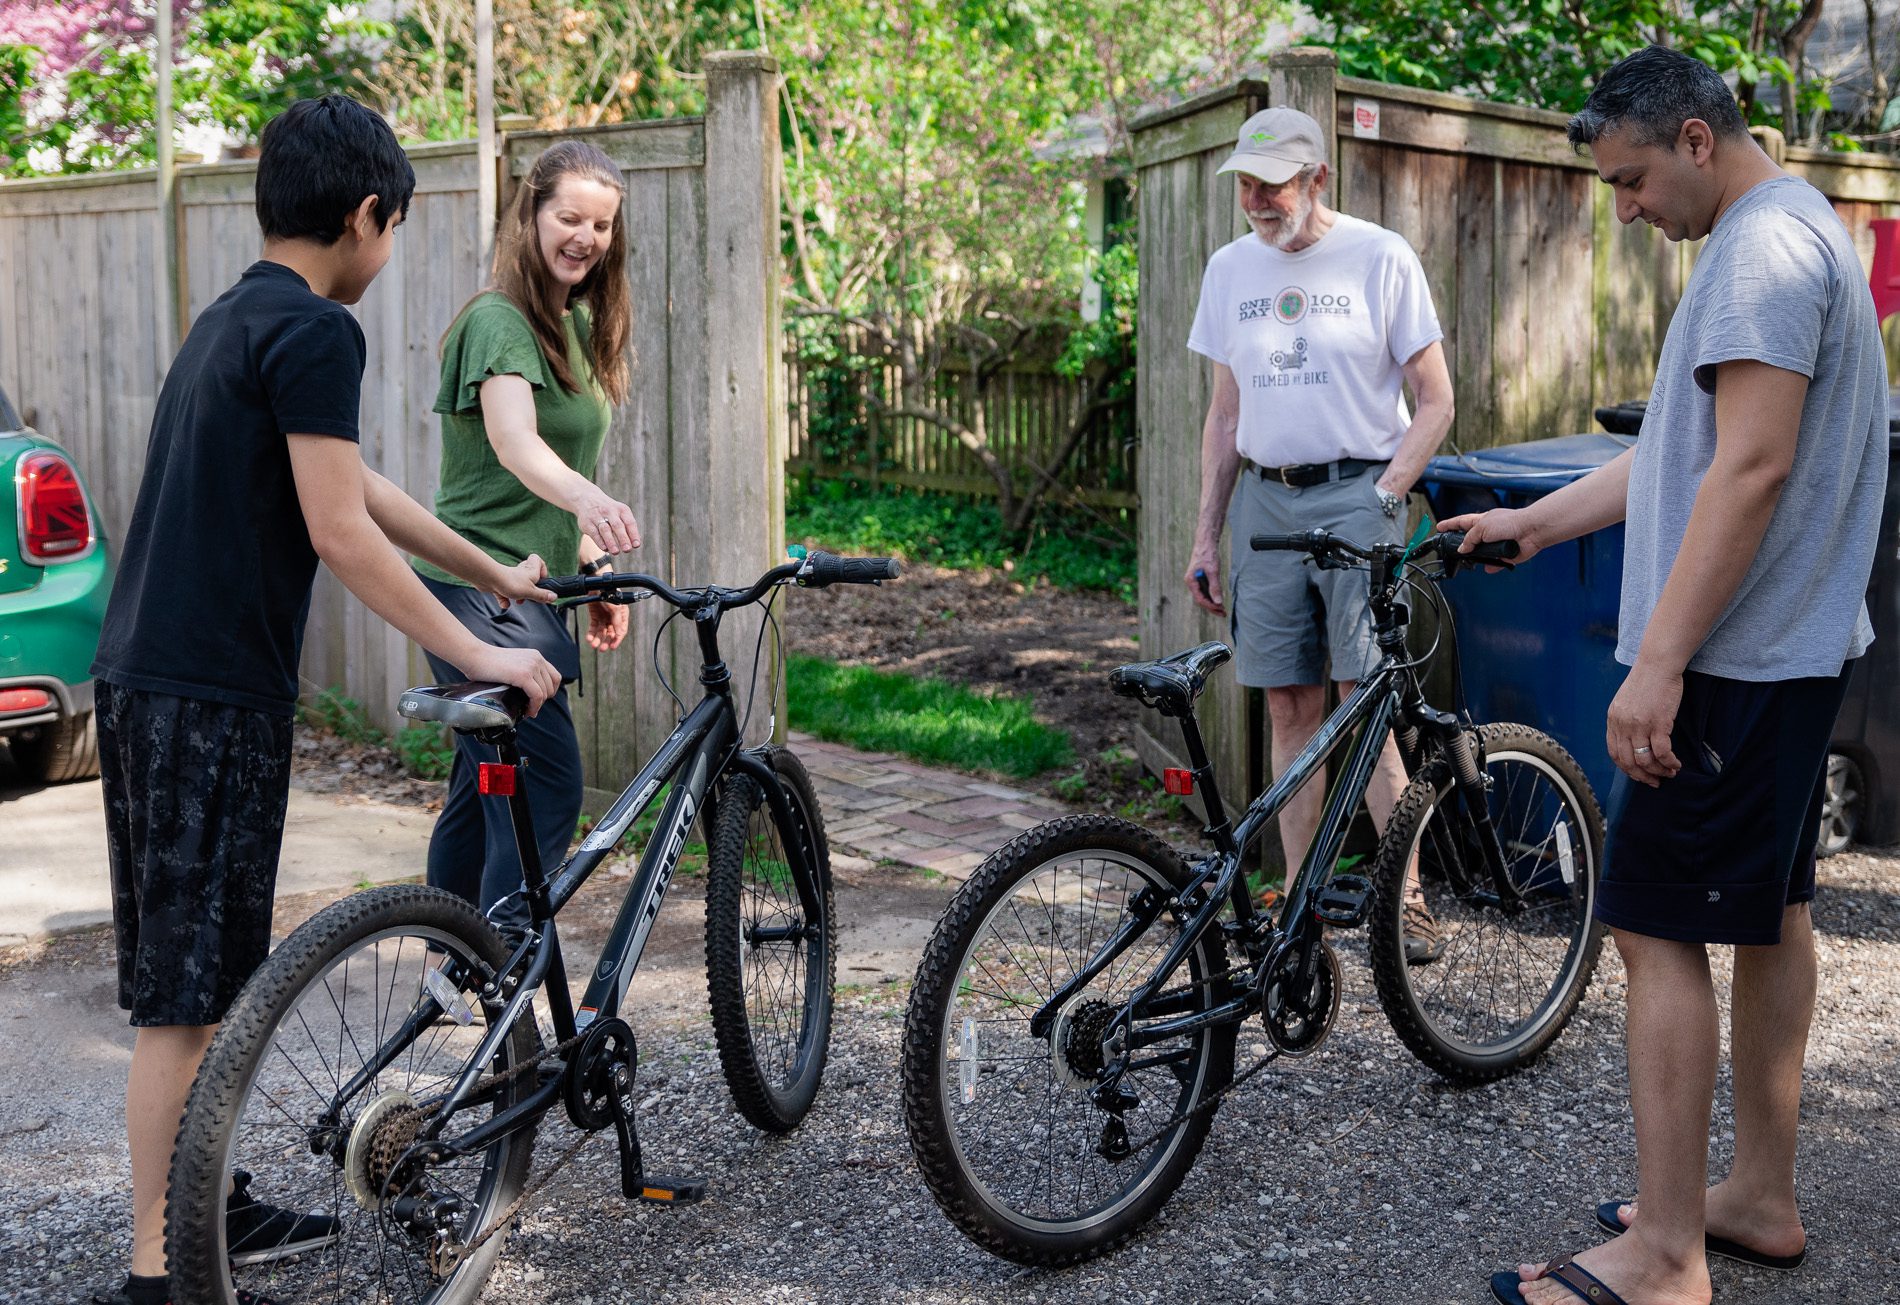 Natalie Moore Topinka and her father, Scott Moore, center, show Yahya Nazari, left, and Nazari’s uncle Mohammad Aimal, right, another bike after his first test ride